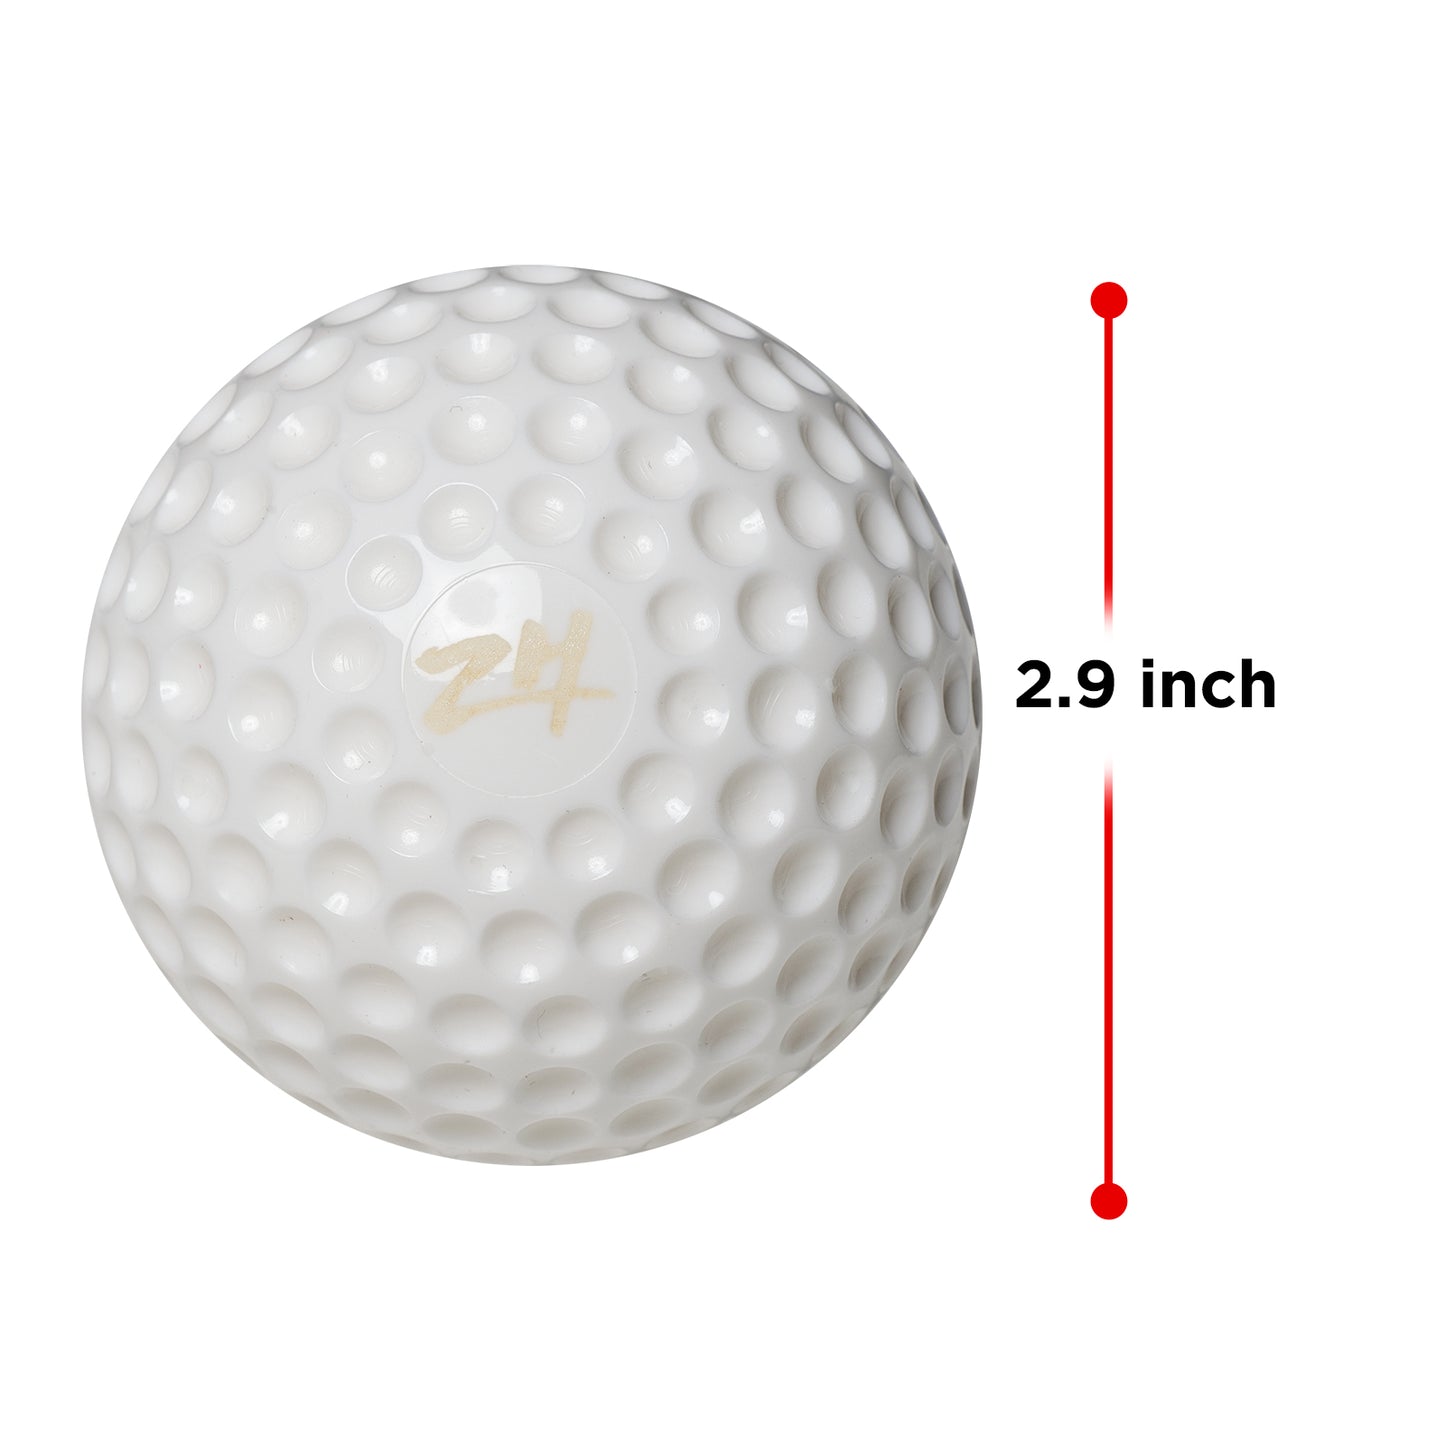 Furlihong 9-Inch Sting-Free Dimpled Training Baseballs Only for 666BH - White